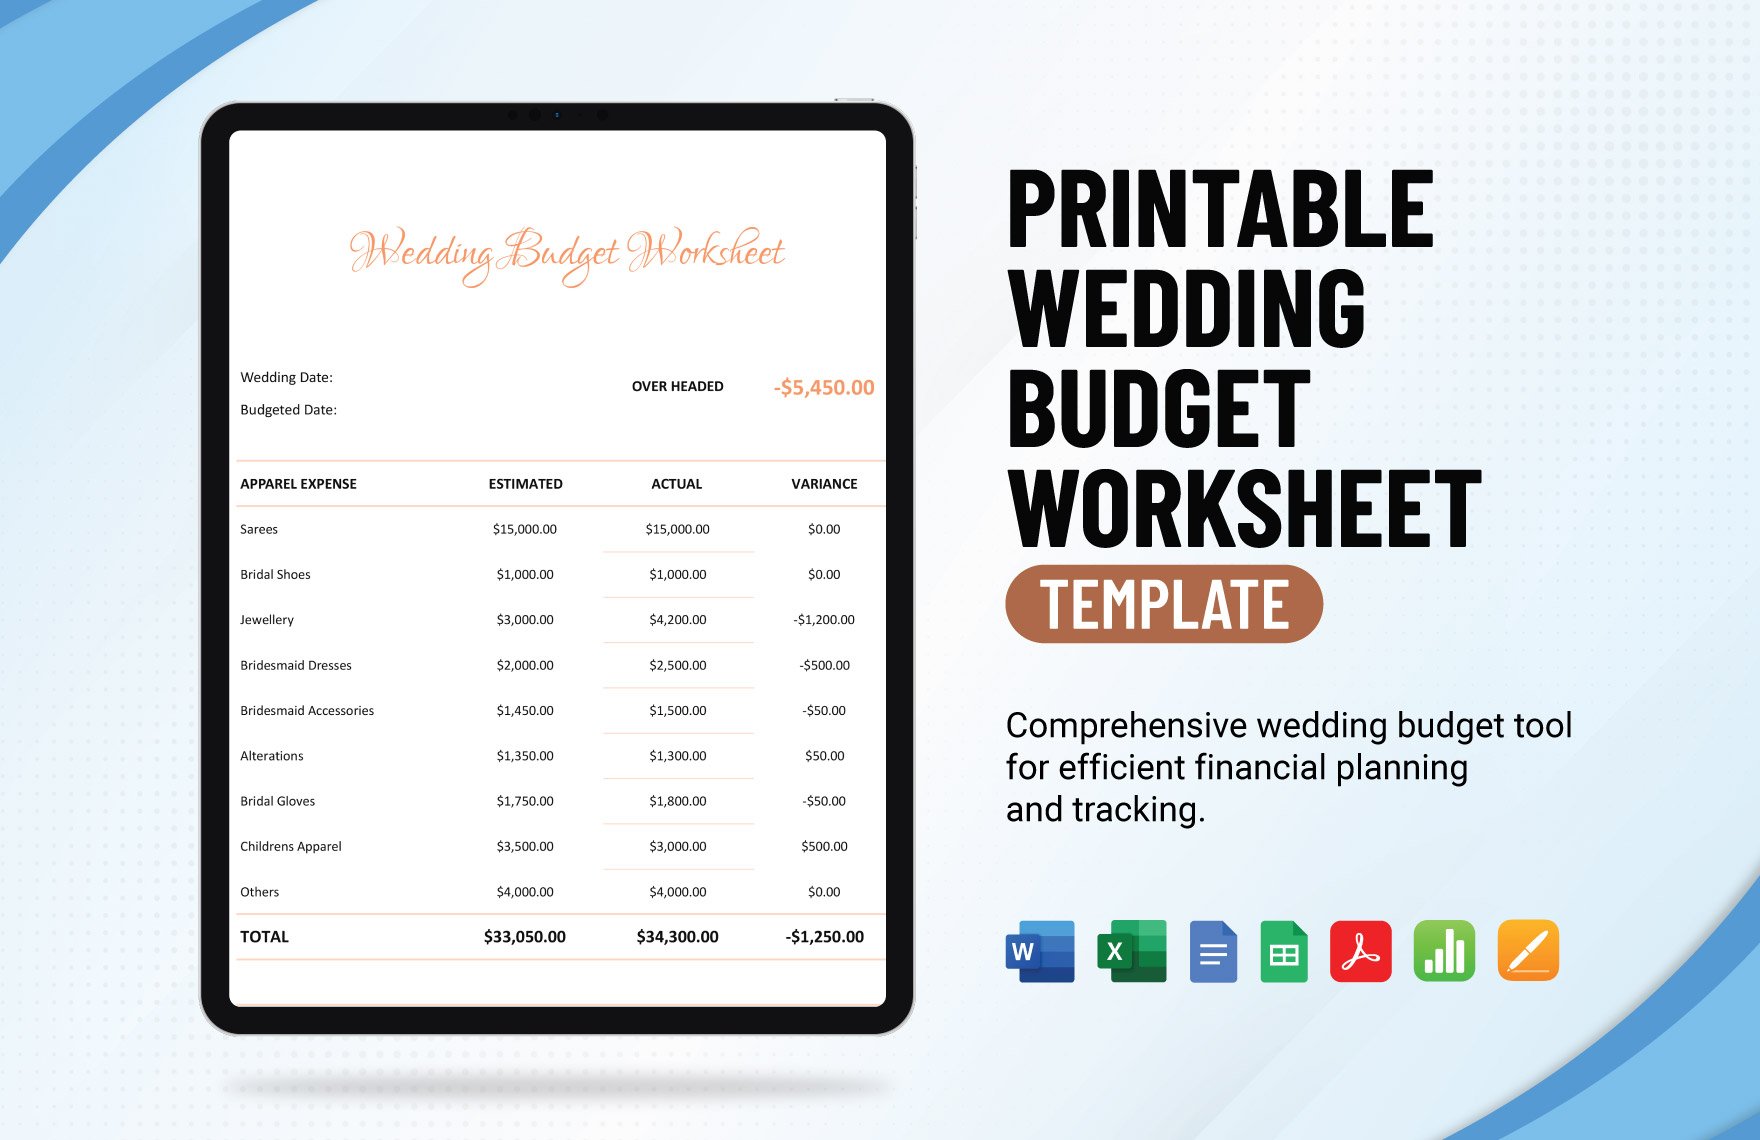 Free Printable Wedding Budget Worksheet Template in Word, Google Docs, Excel, PDF, Google Sheets, Apple Pages, Apple Numbers